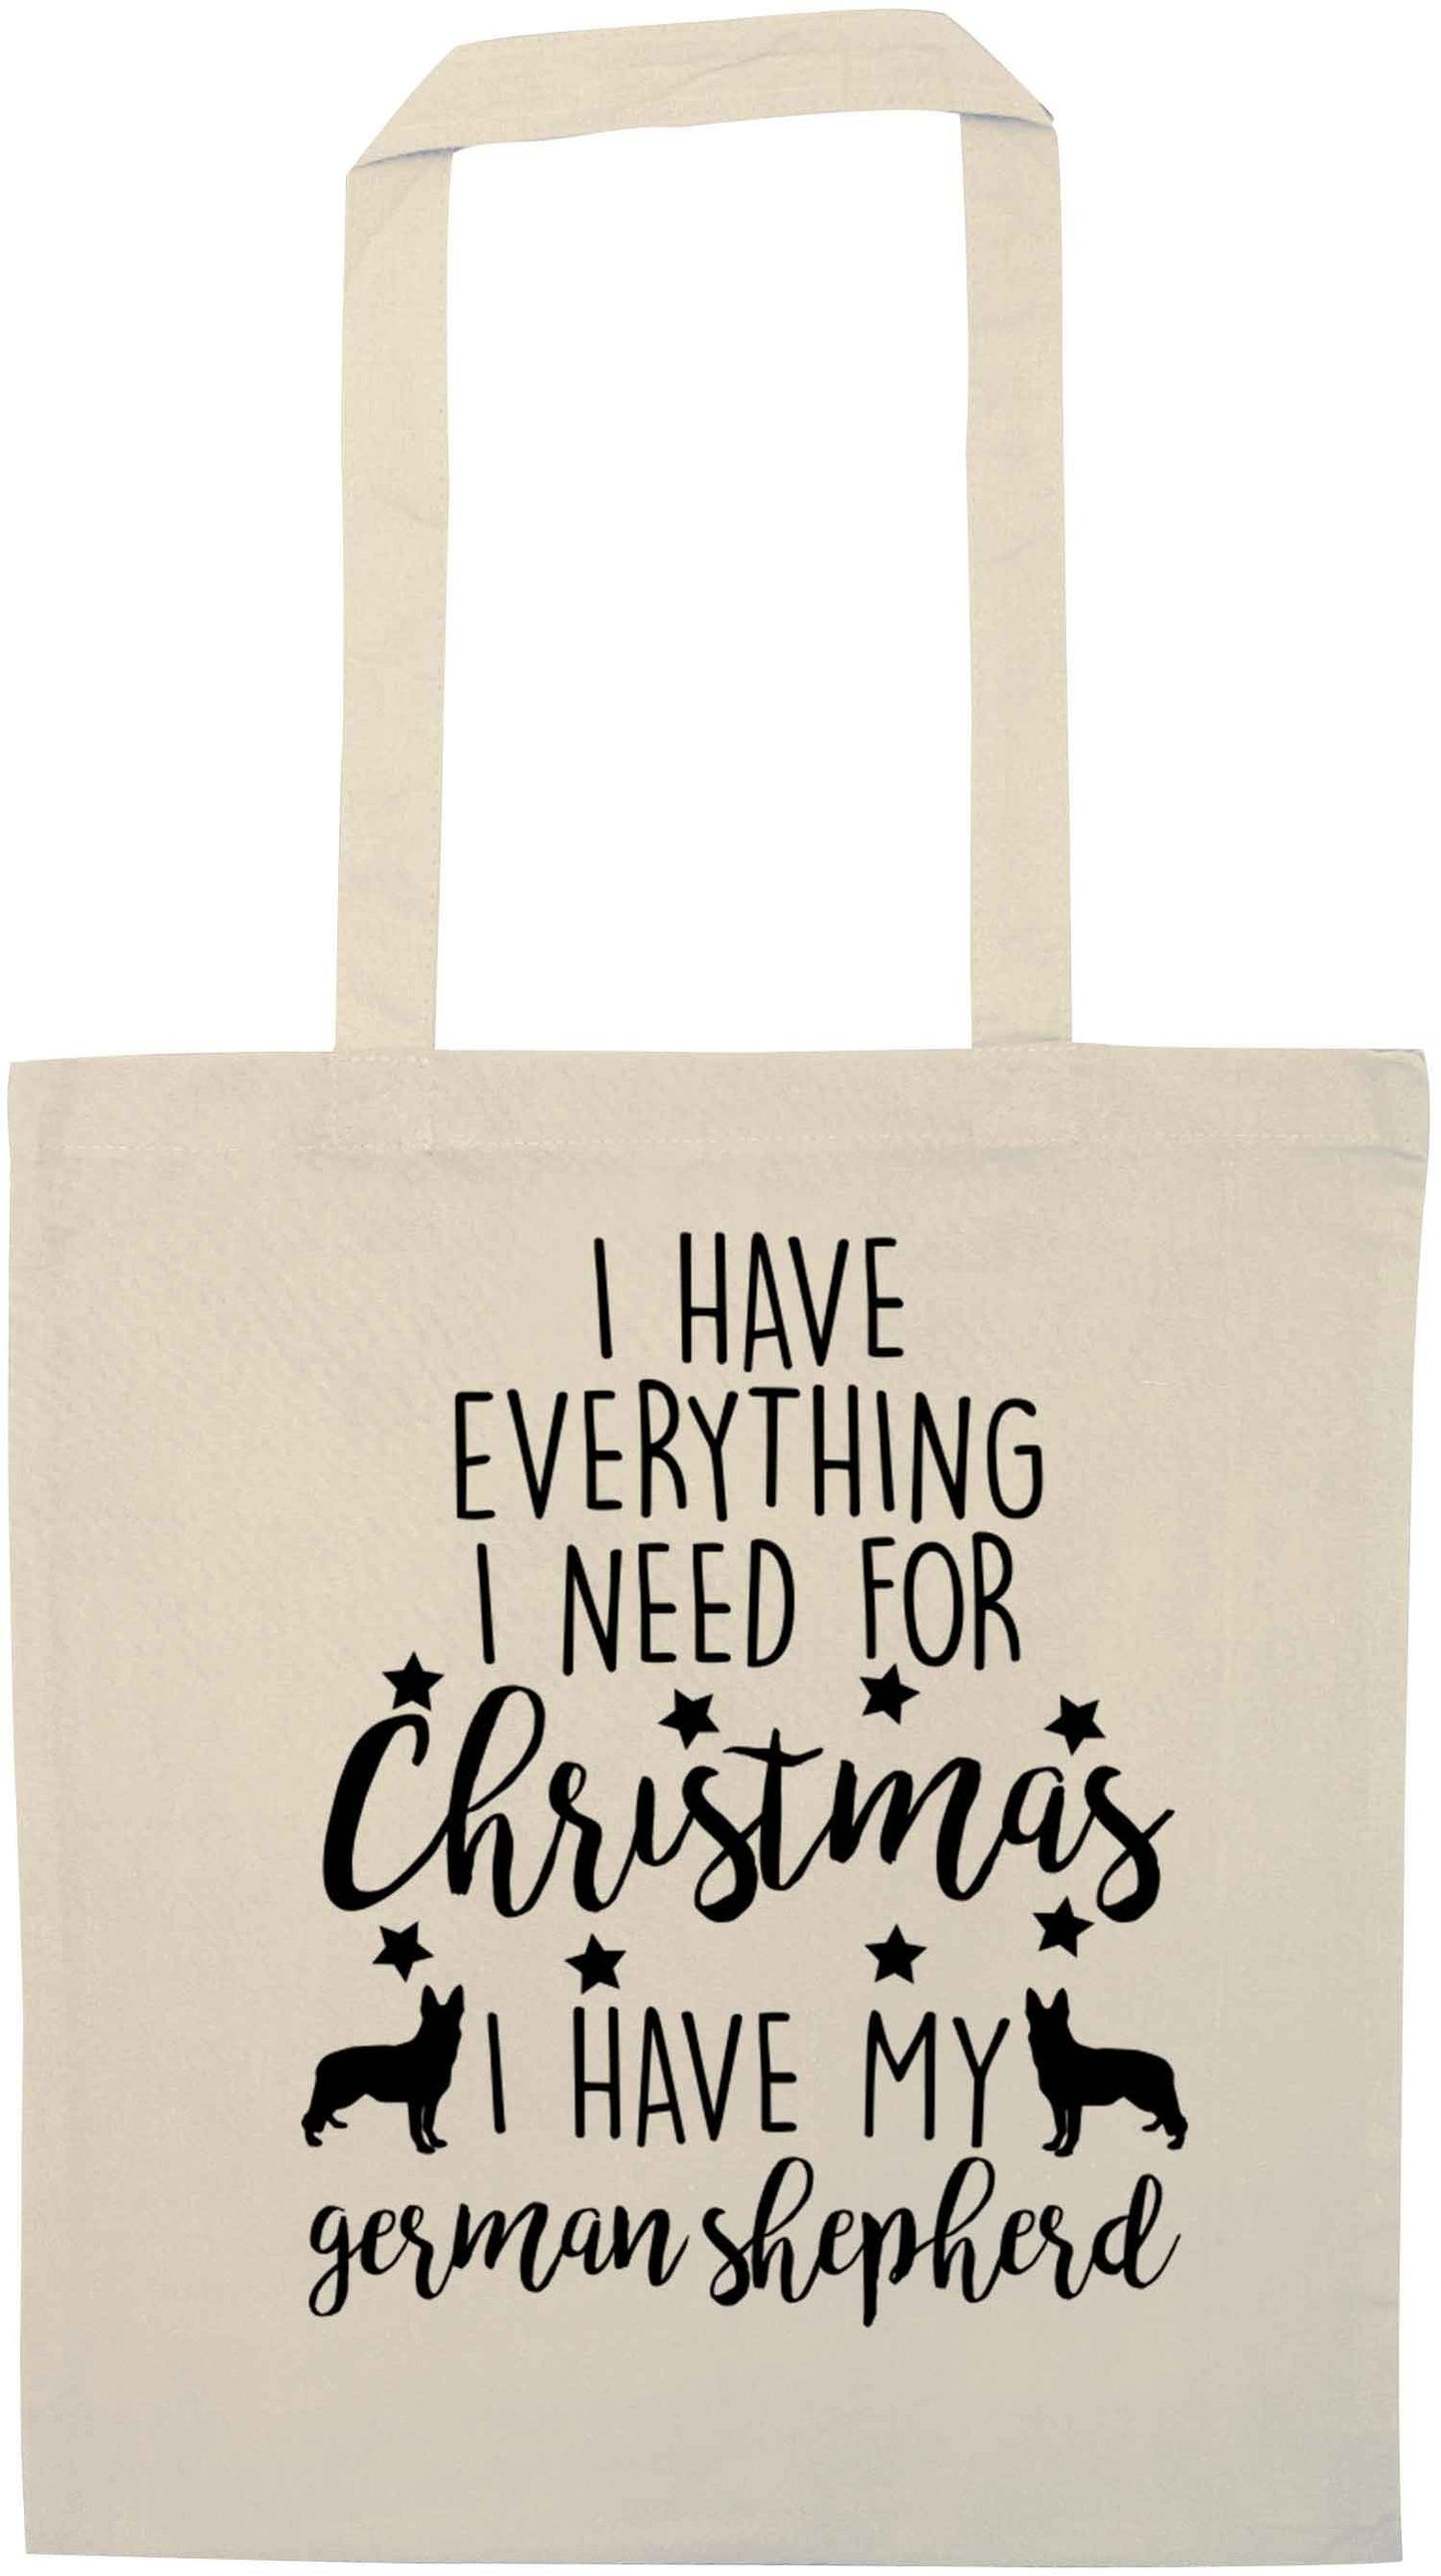 I have everything I need for Christmas I have my german shepherd natural tote bag